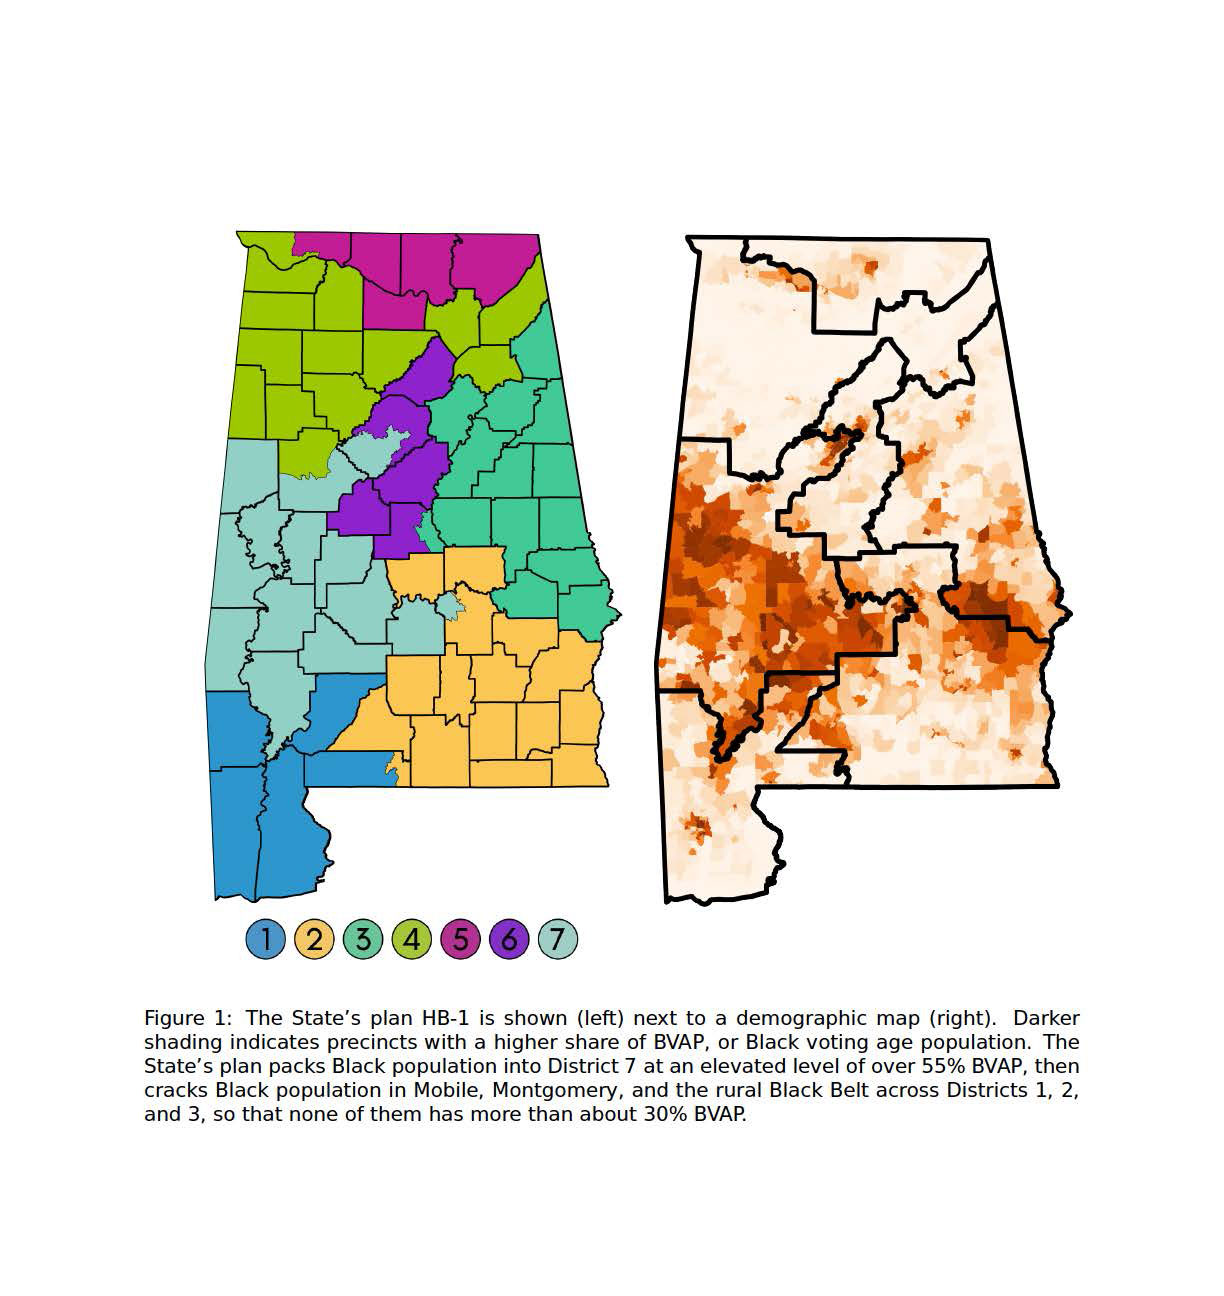 two maps of Alabama showing a redistricting plan and a demographic map